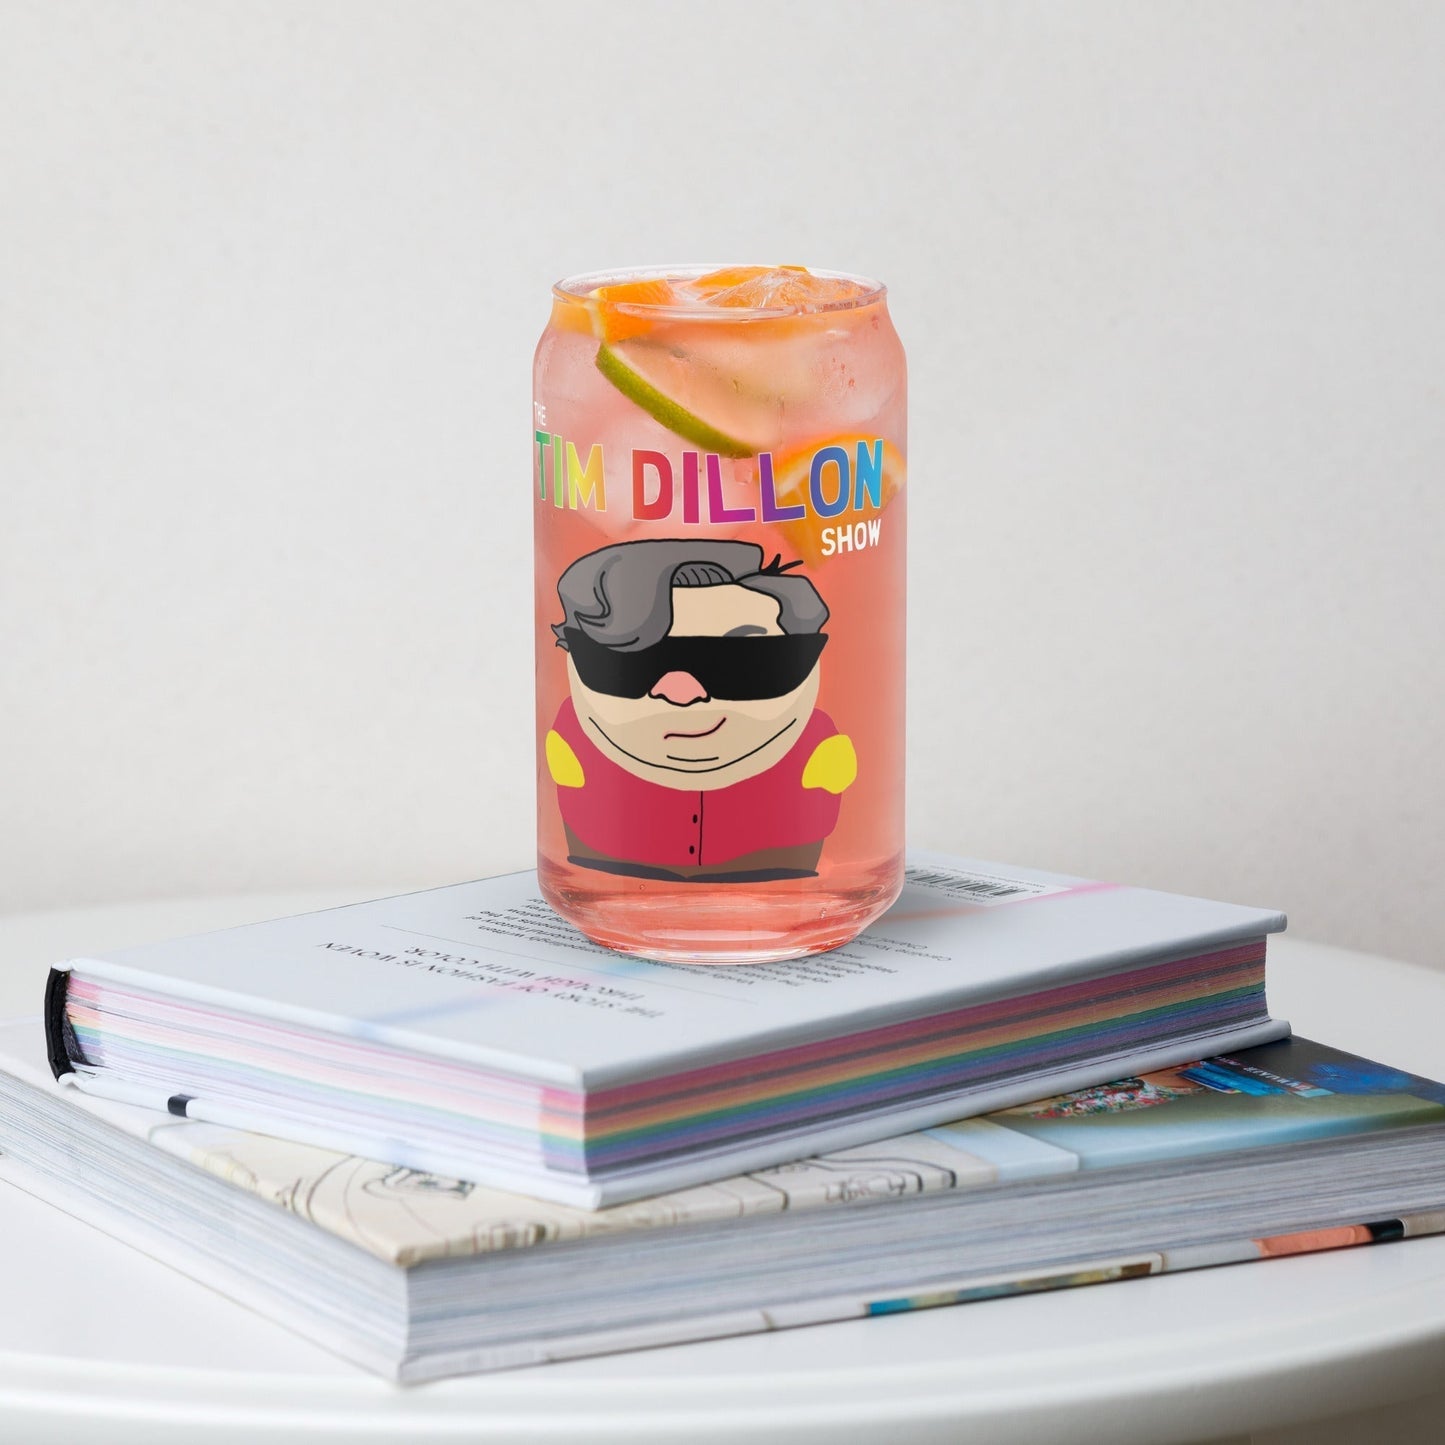 Tim Dillon Cartman, Southpark, The Tim Dillon Show, Tim Dillon Podcast, Tim Dillon Merch, Tim Dillon Can-shaped glass Next Cult Brand Podcasts, Stand-up Comedy, Tim Dillon